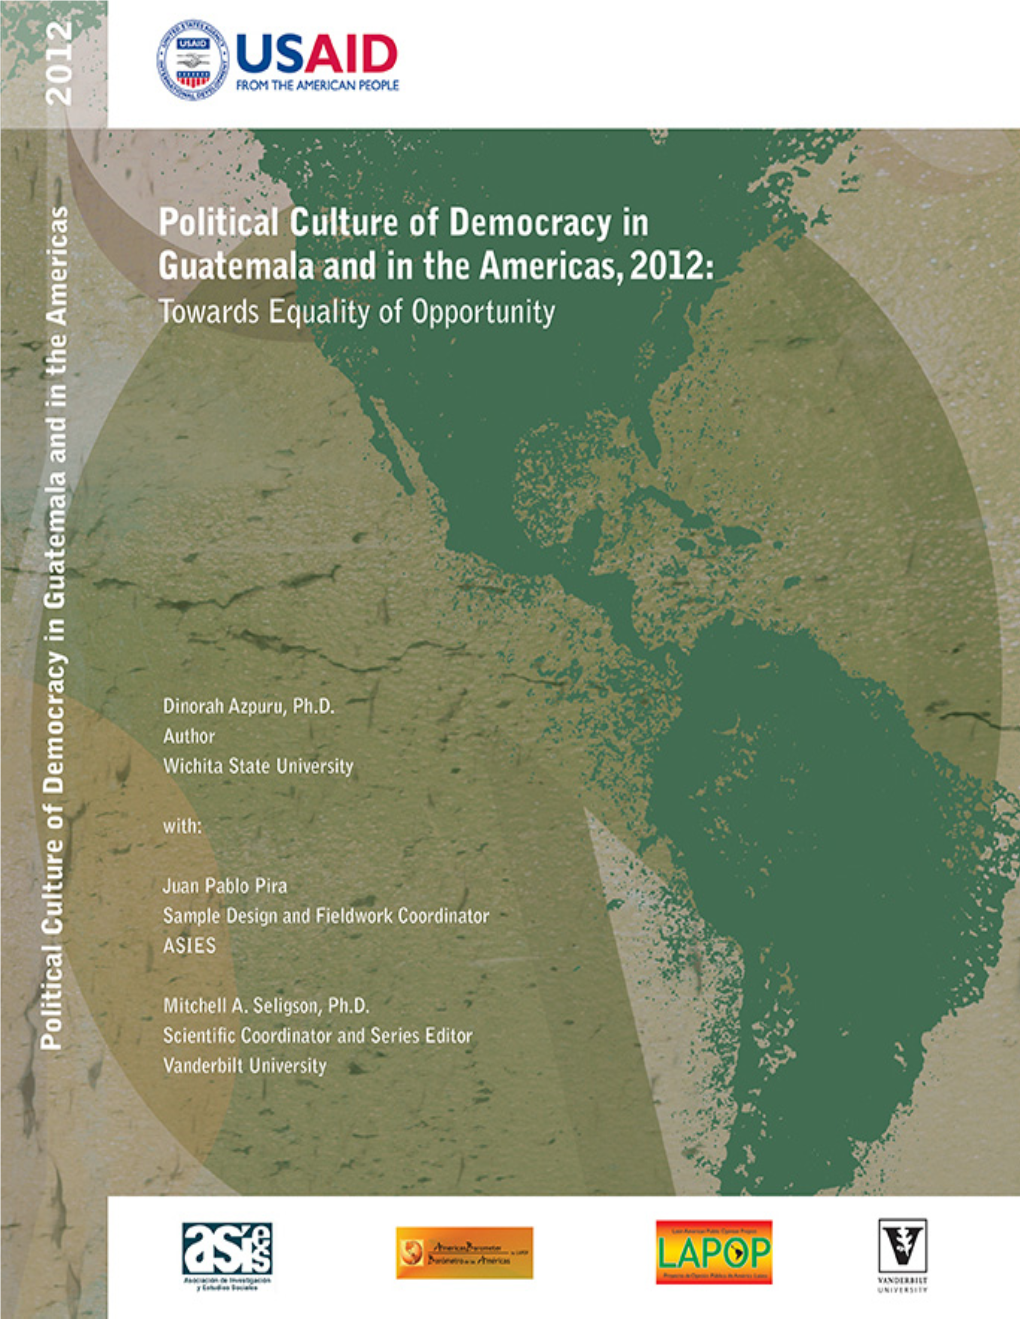 Political Culture of Democracy in Guatemala and the Americas, 2012: Towards Equality of Opportunity TENTH STUDY of DEMOCRATIC CULTURE of GUATEMALANS